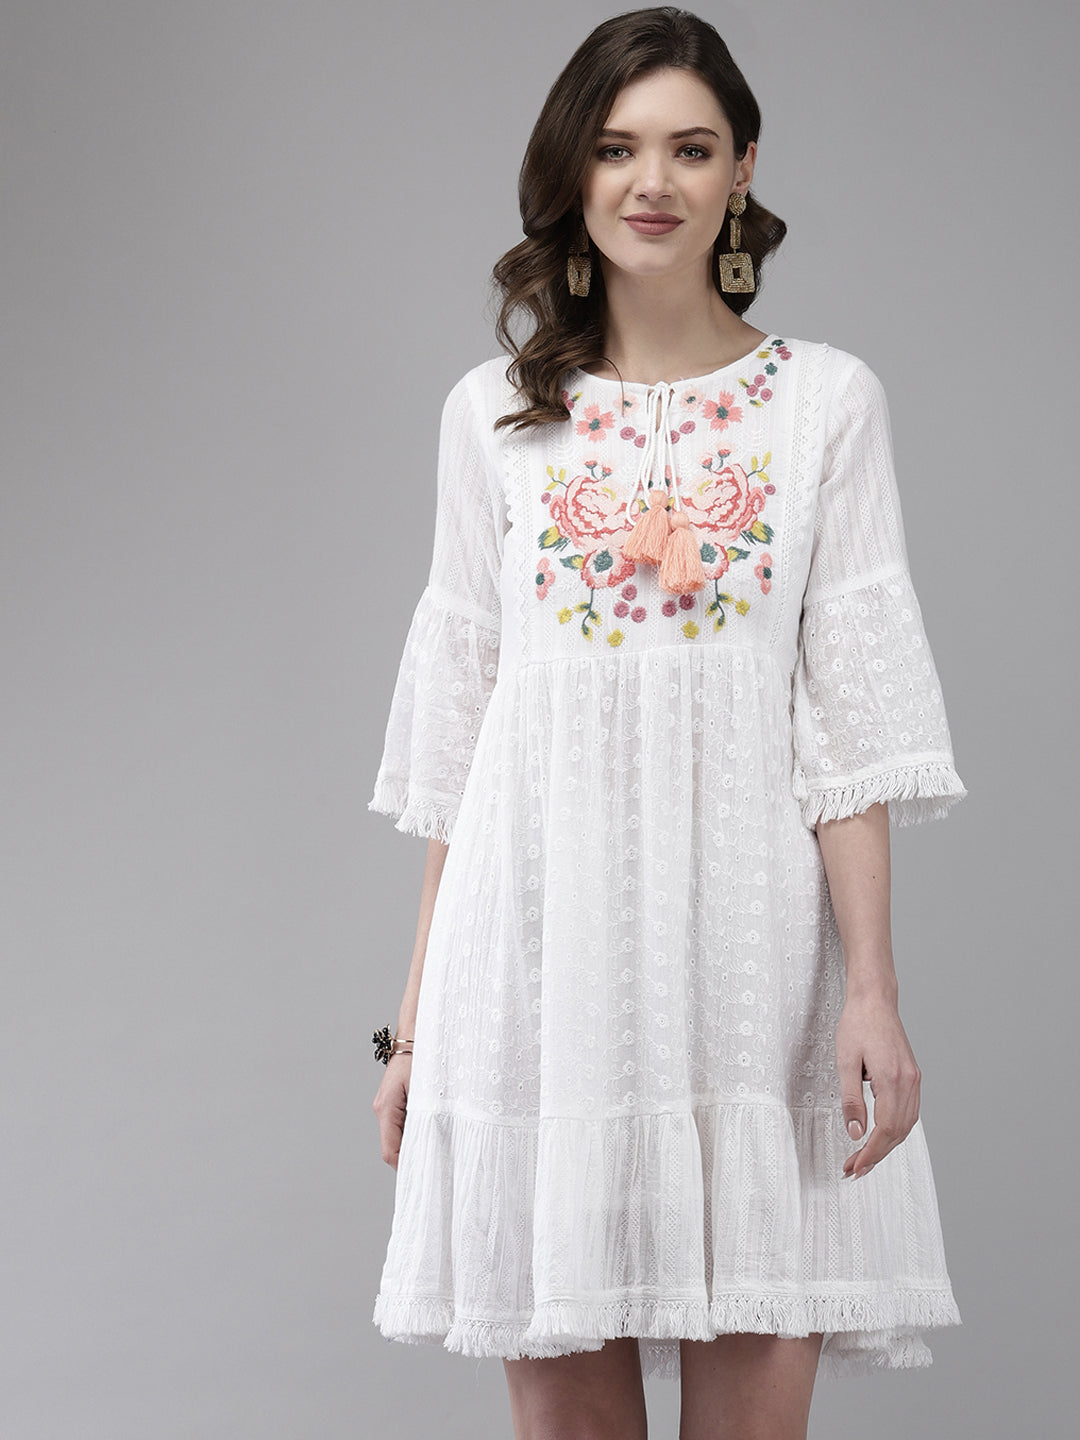 Ishin Women's Cotton Blend White Embroidered A-Line Dress